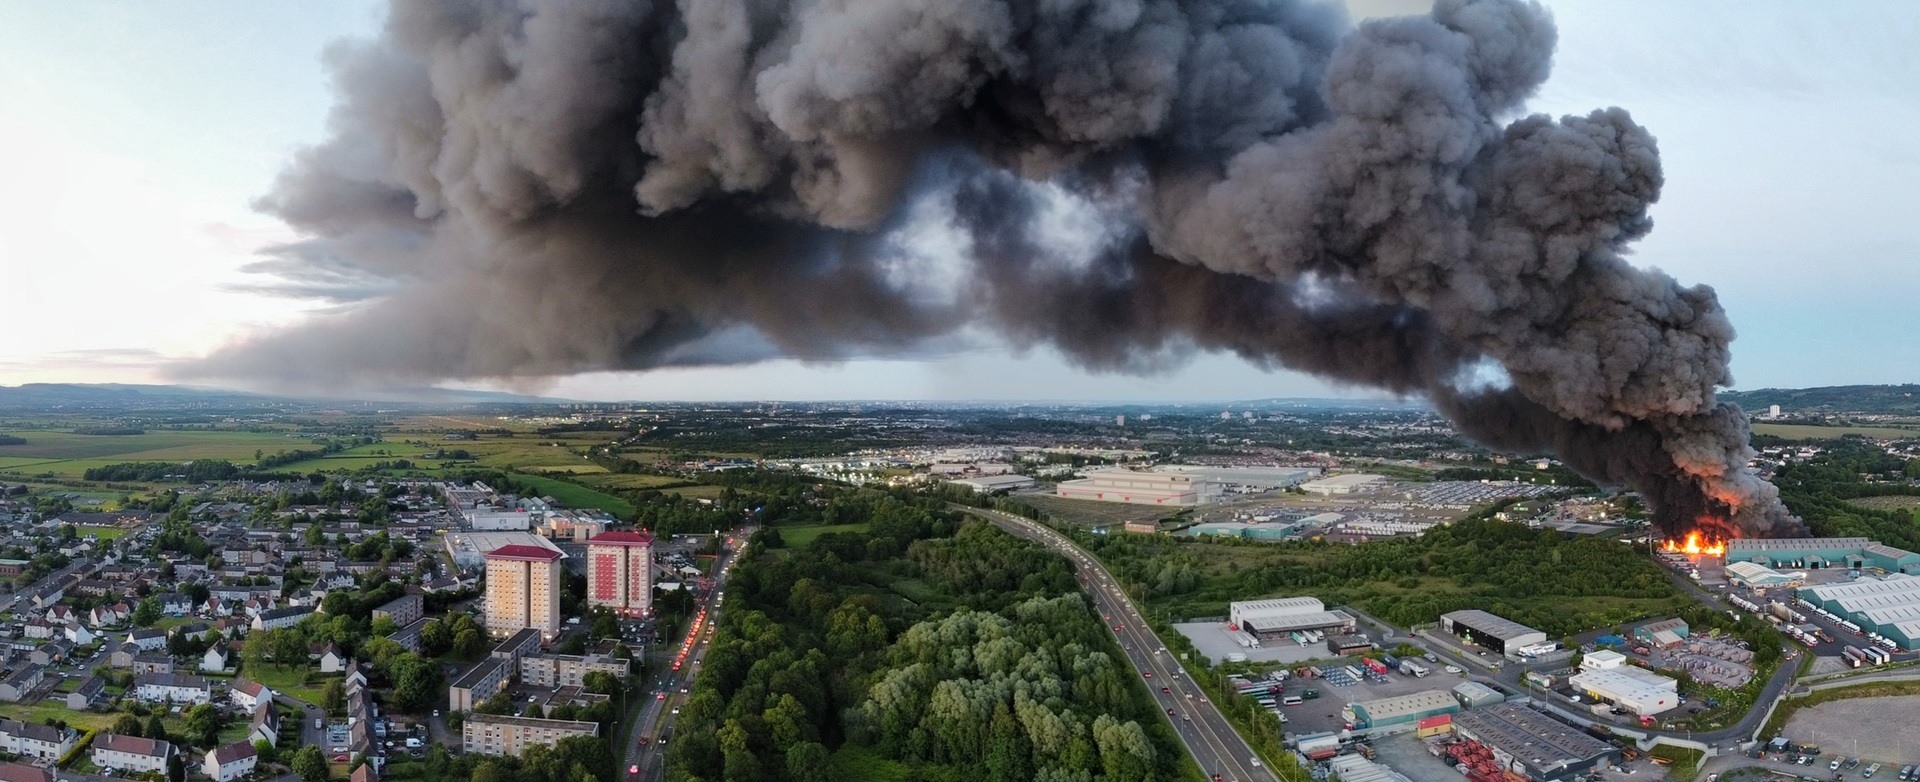 A massive plume of smoke has engulfed the sky west of Glasgow after a fire erupted near an industrial estate in Paisley.